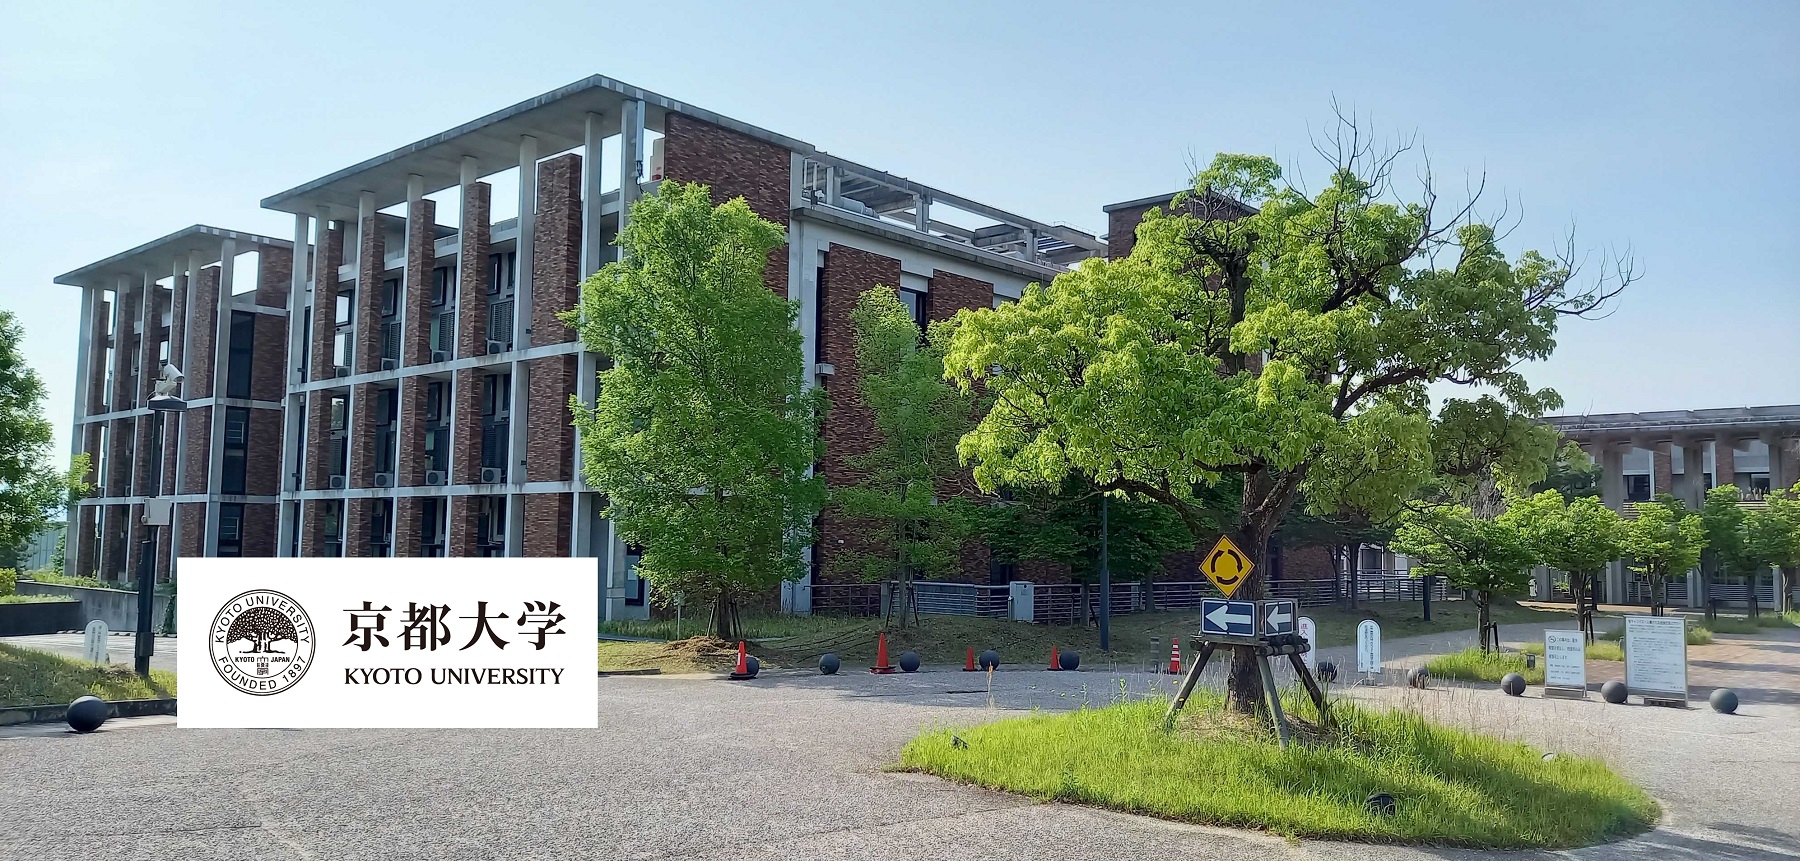 Catalytic Organic Chemistry Lab., Department of Engergy and Hydrocarbon Chemistry, Graduate School of Engineering, Kyoto University